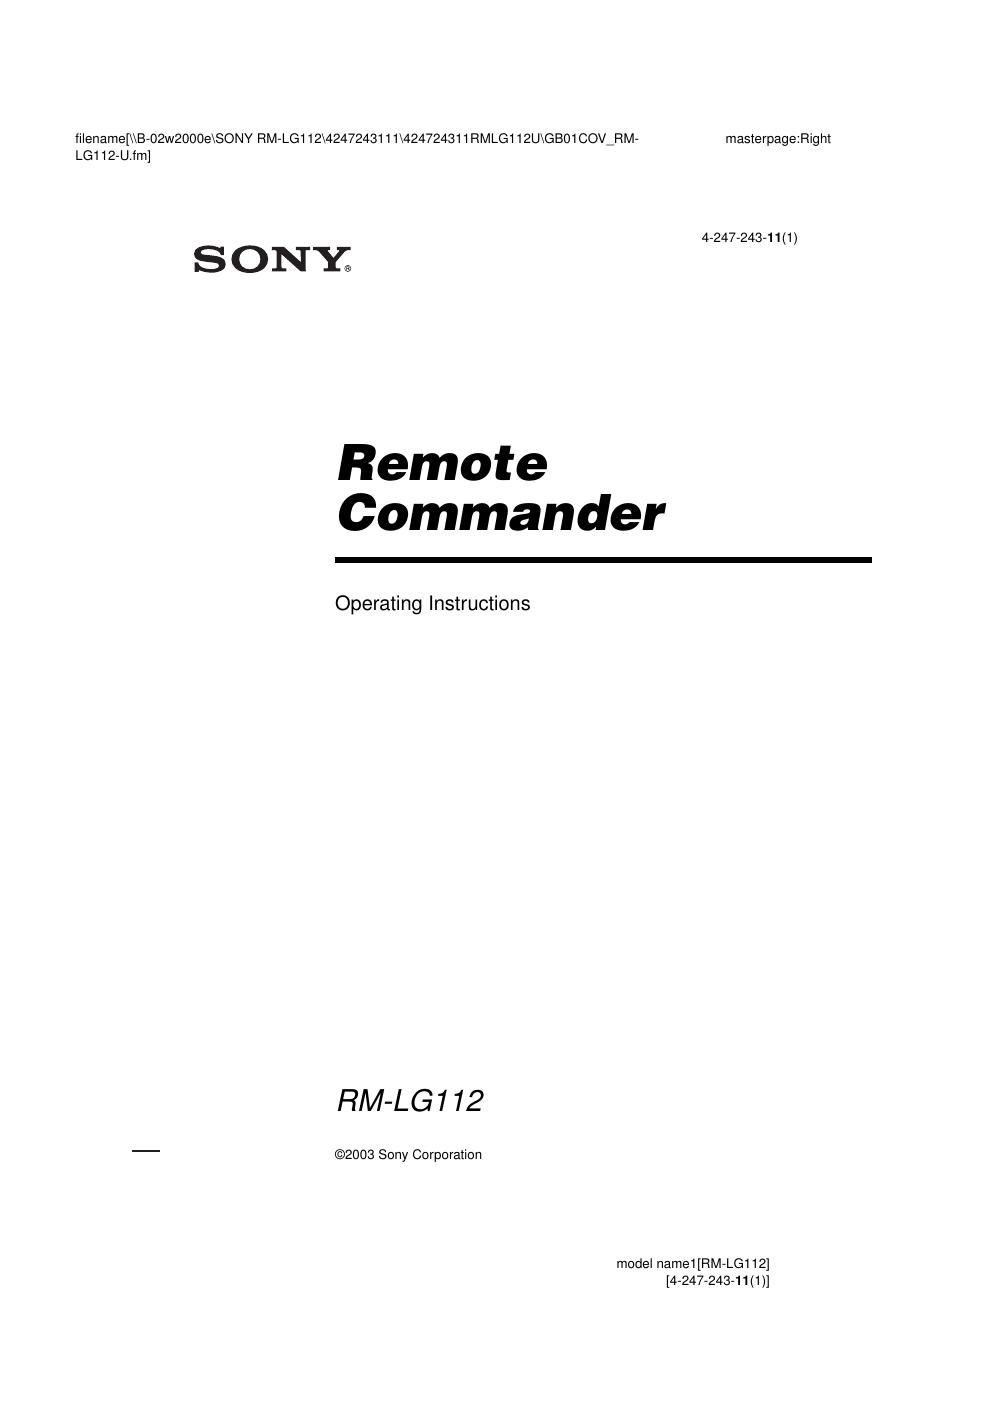 sony rm lg 112 owners manual